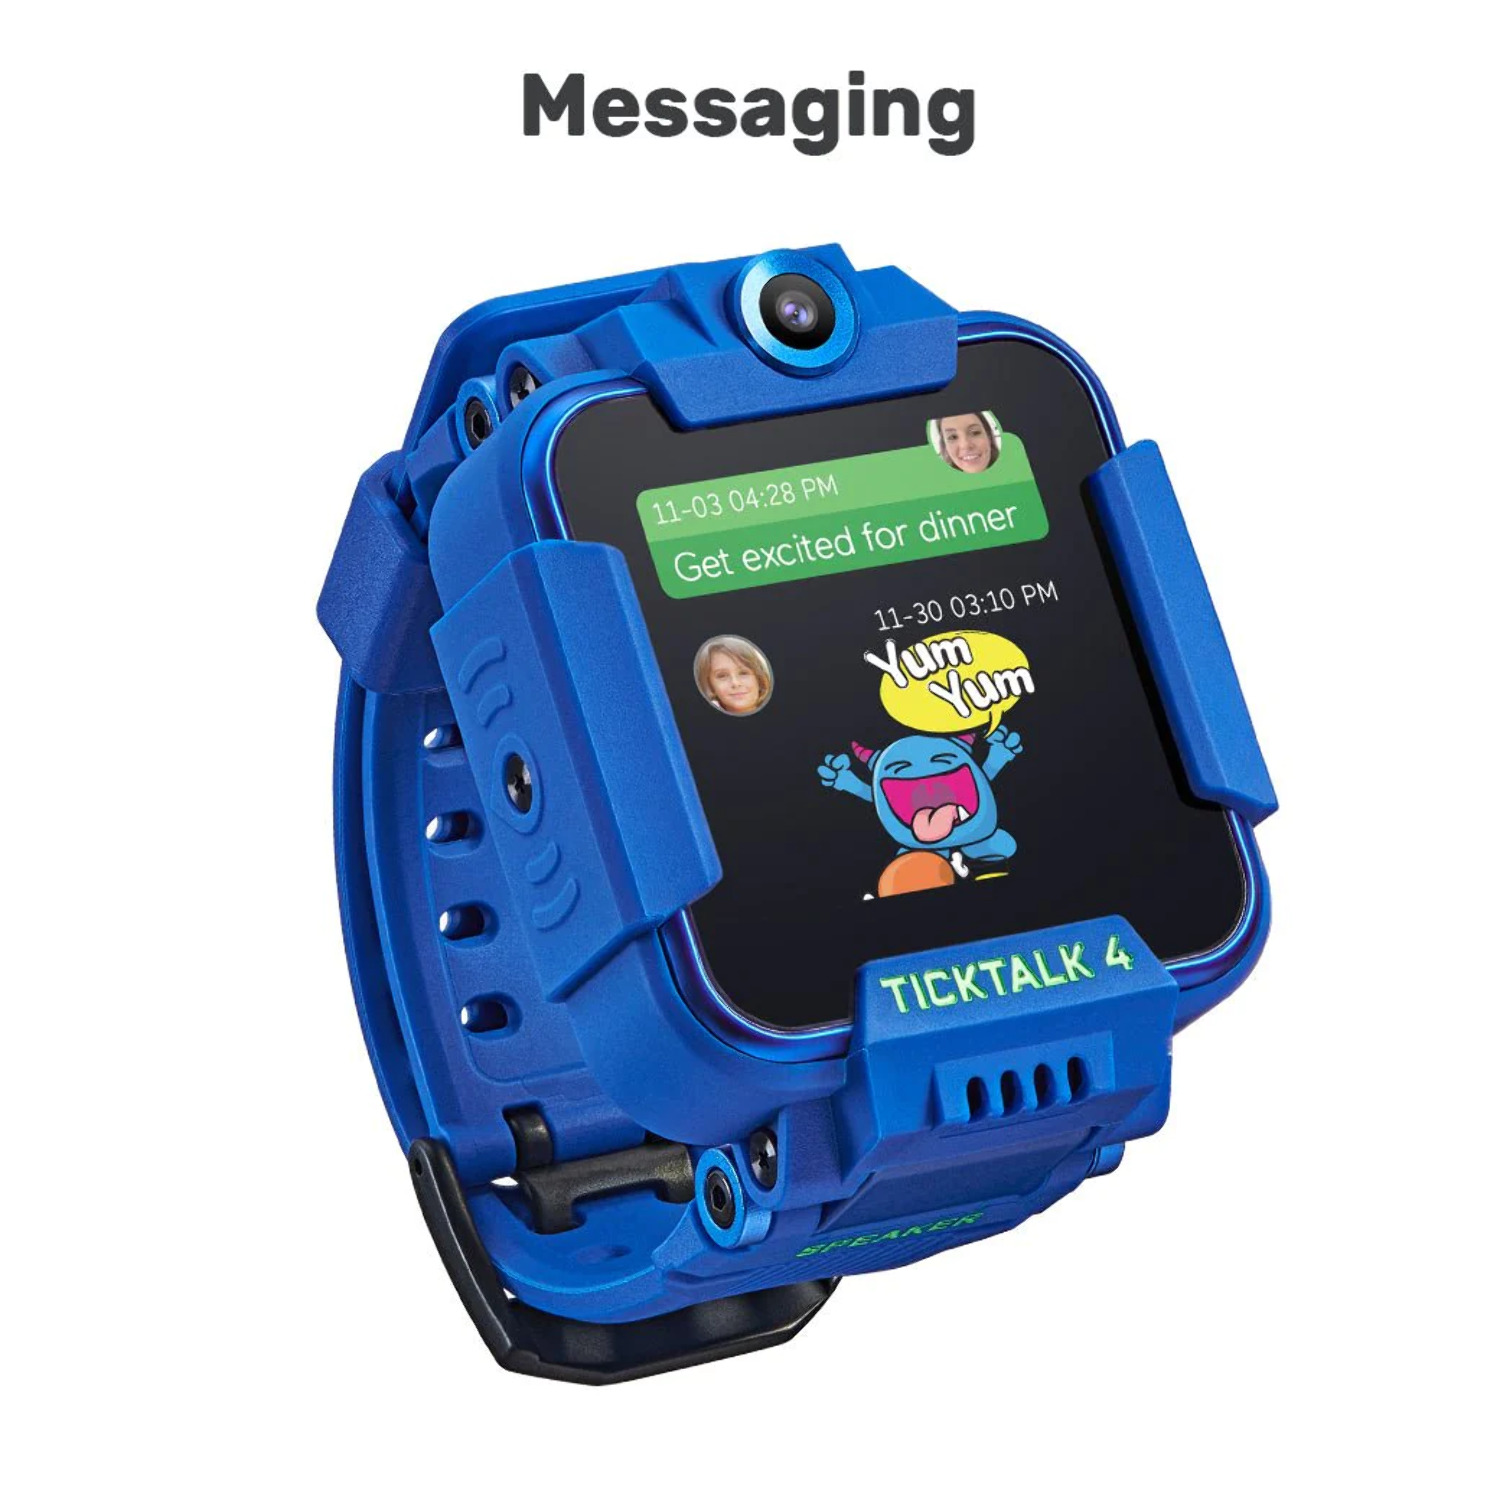 TickTalk 4 Unlocked 4G LTE Kids Smartwatch Phone with GPS Tracker, Combines Video, Voice and Wi-Fi Calling, Messaging, 2x Cameras & Free Streaming Music - image 4 of 11